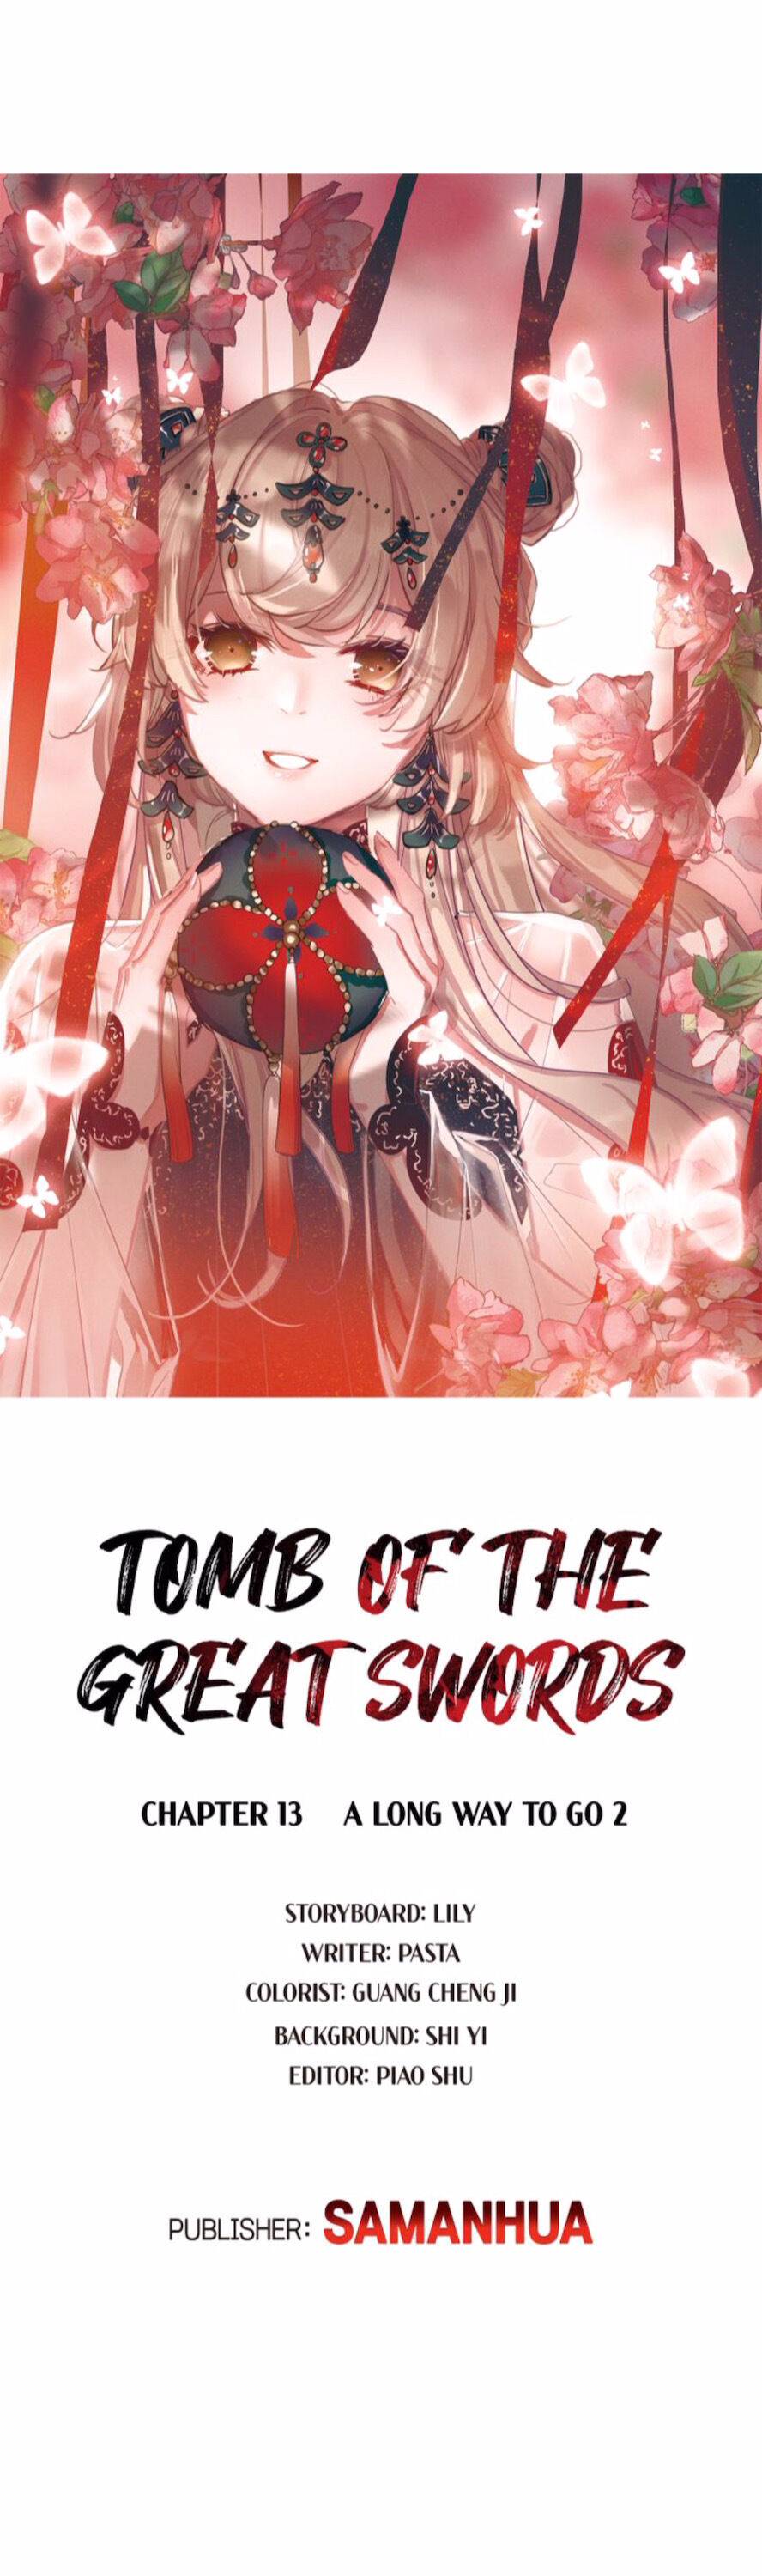 Tomb of the Great Swords Chapter 13